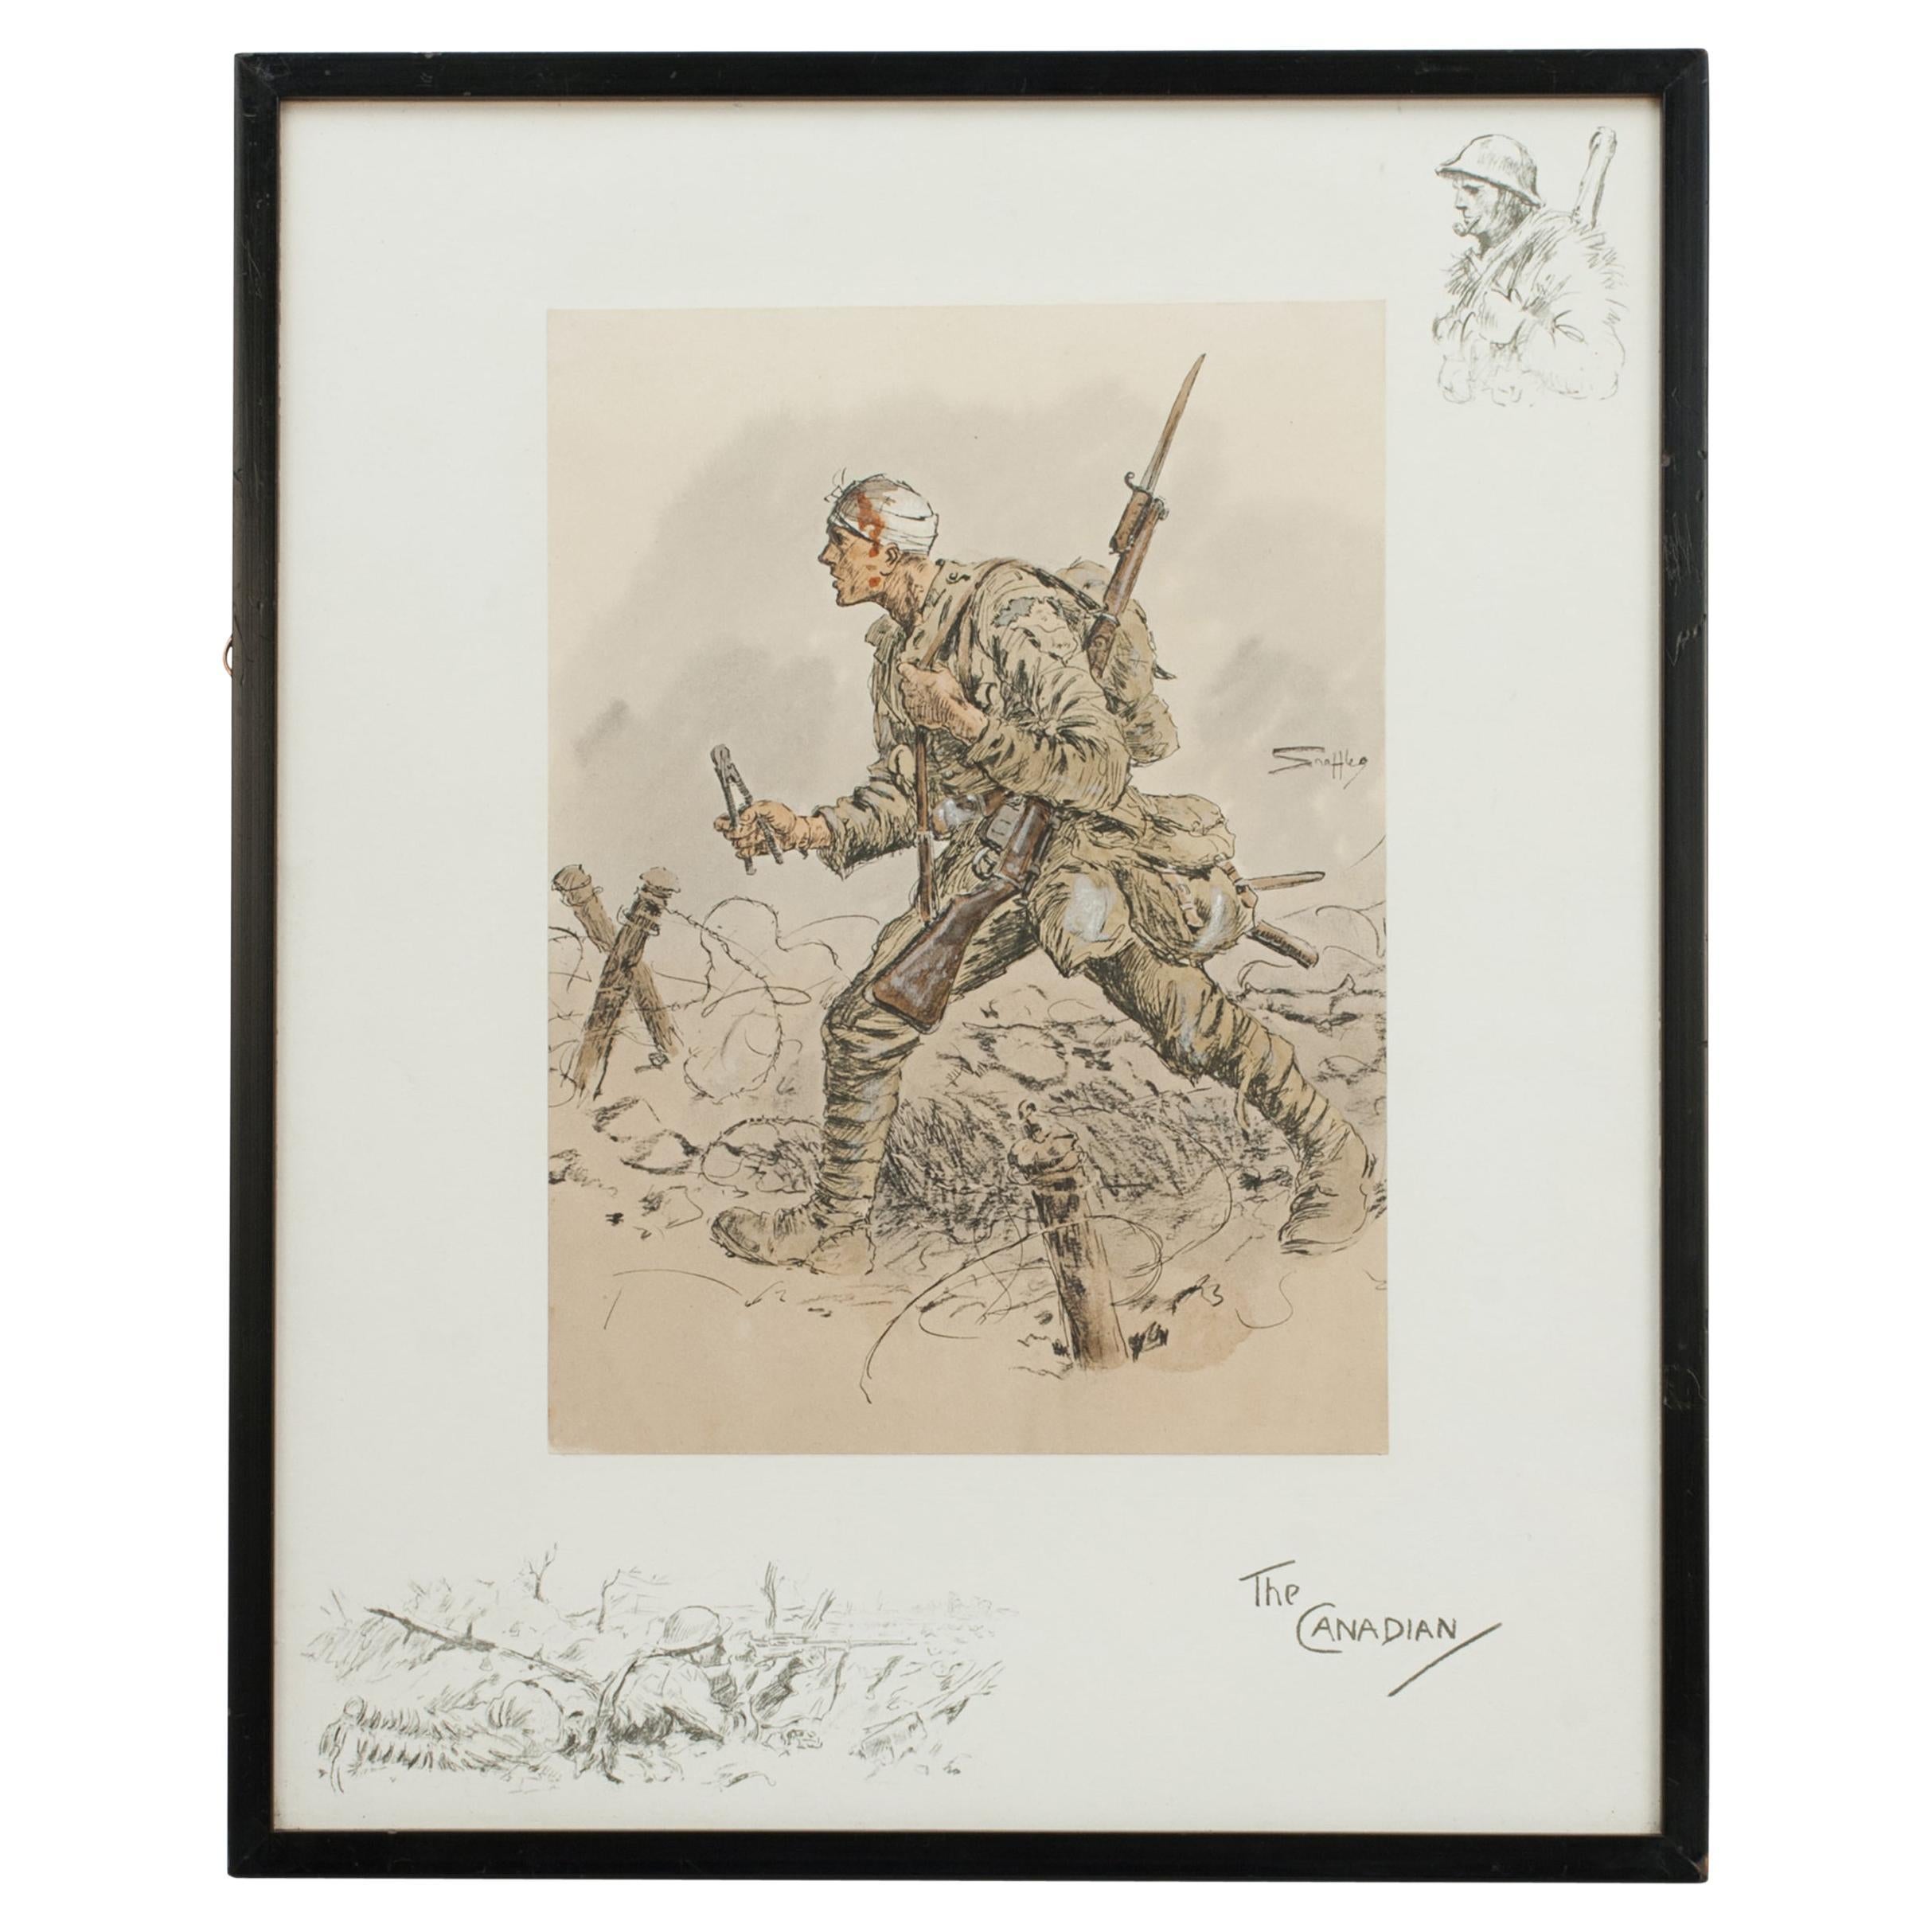 WW1 Military Print, Canadian, by Snaffles